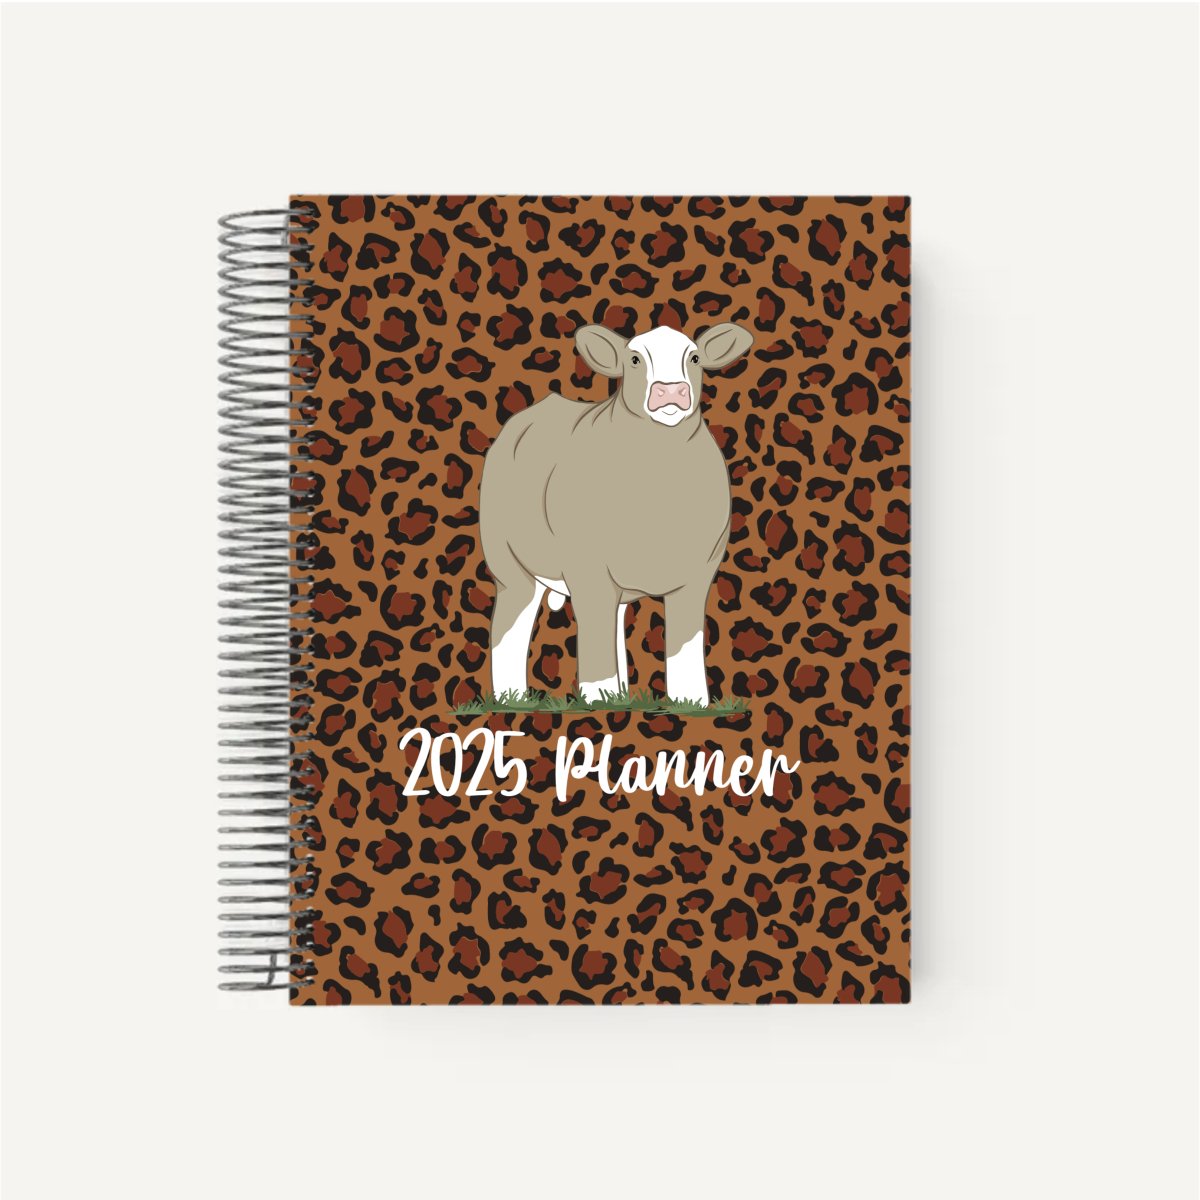 Personalized-Livestock-Daily Planner - Cheetah Cover